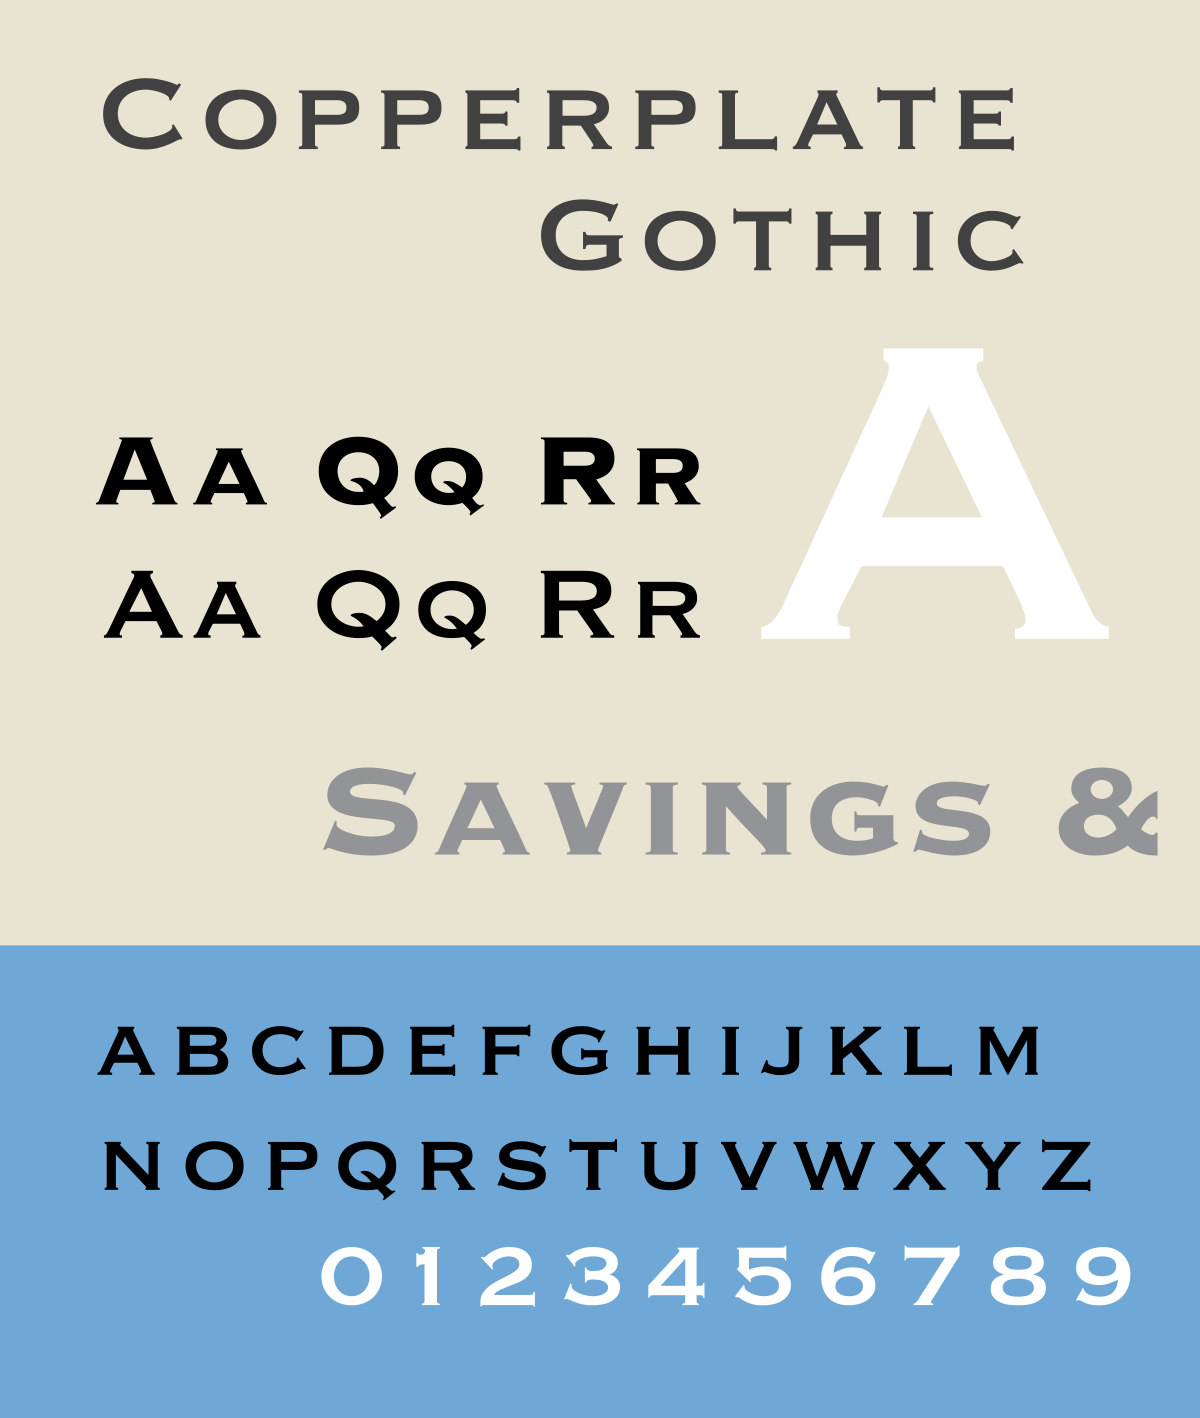 Font Copperplate Gothic